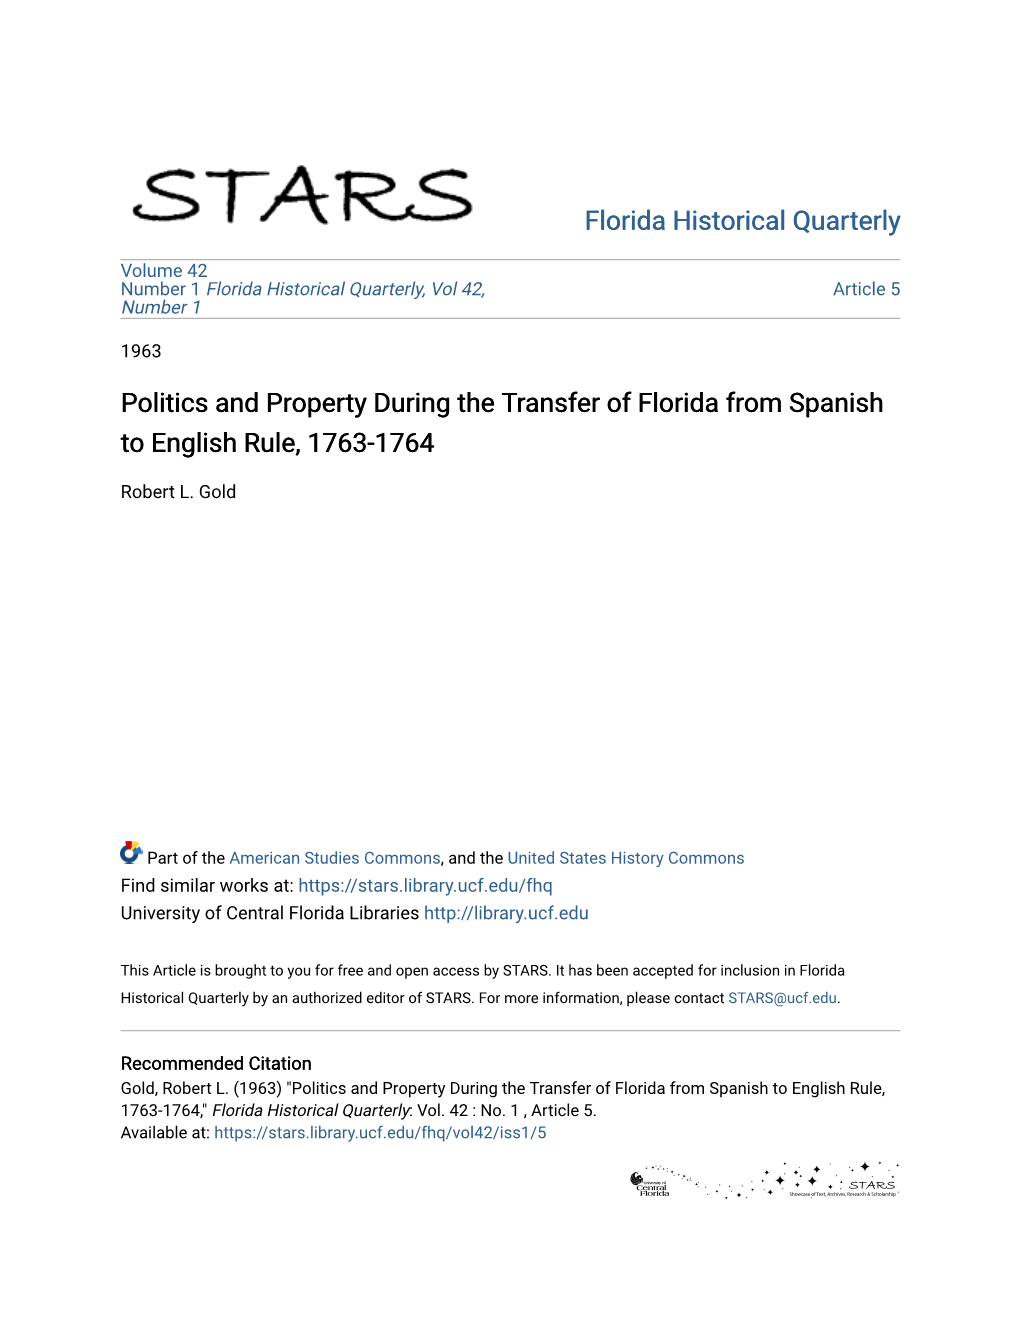 Politics and Property During the Transfer of Florida from Spanish to English Rule, 1763-1764